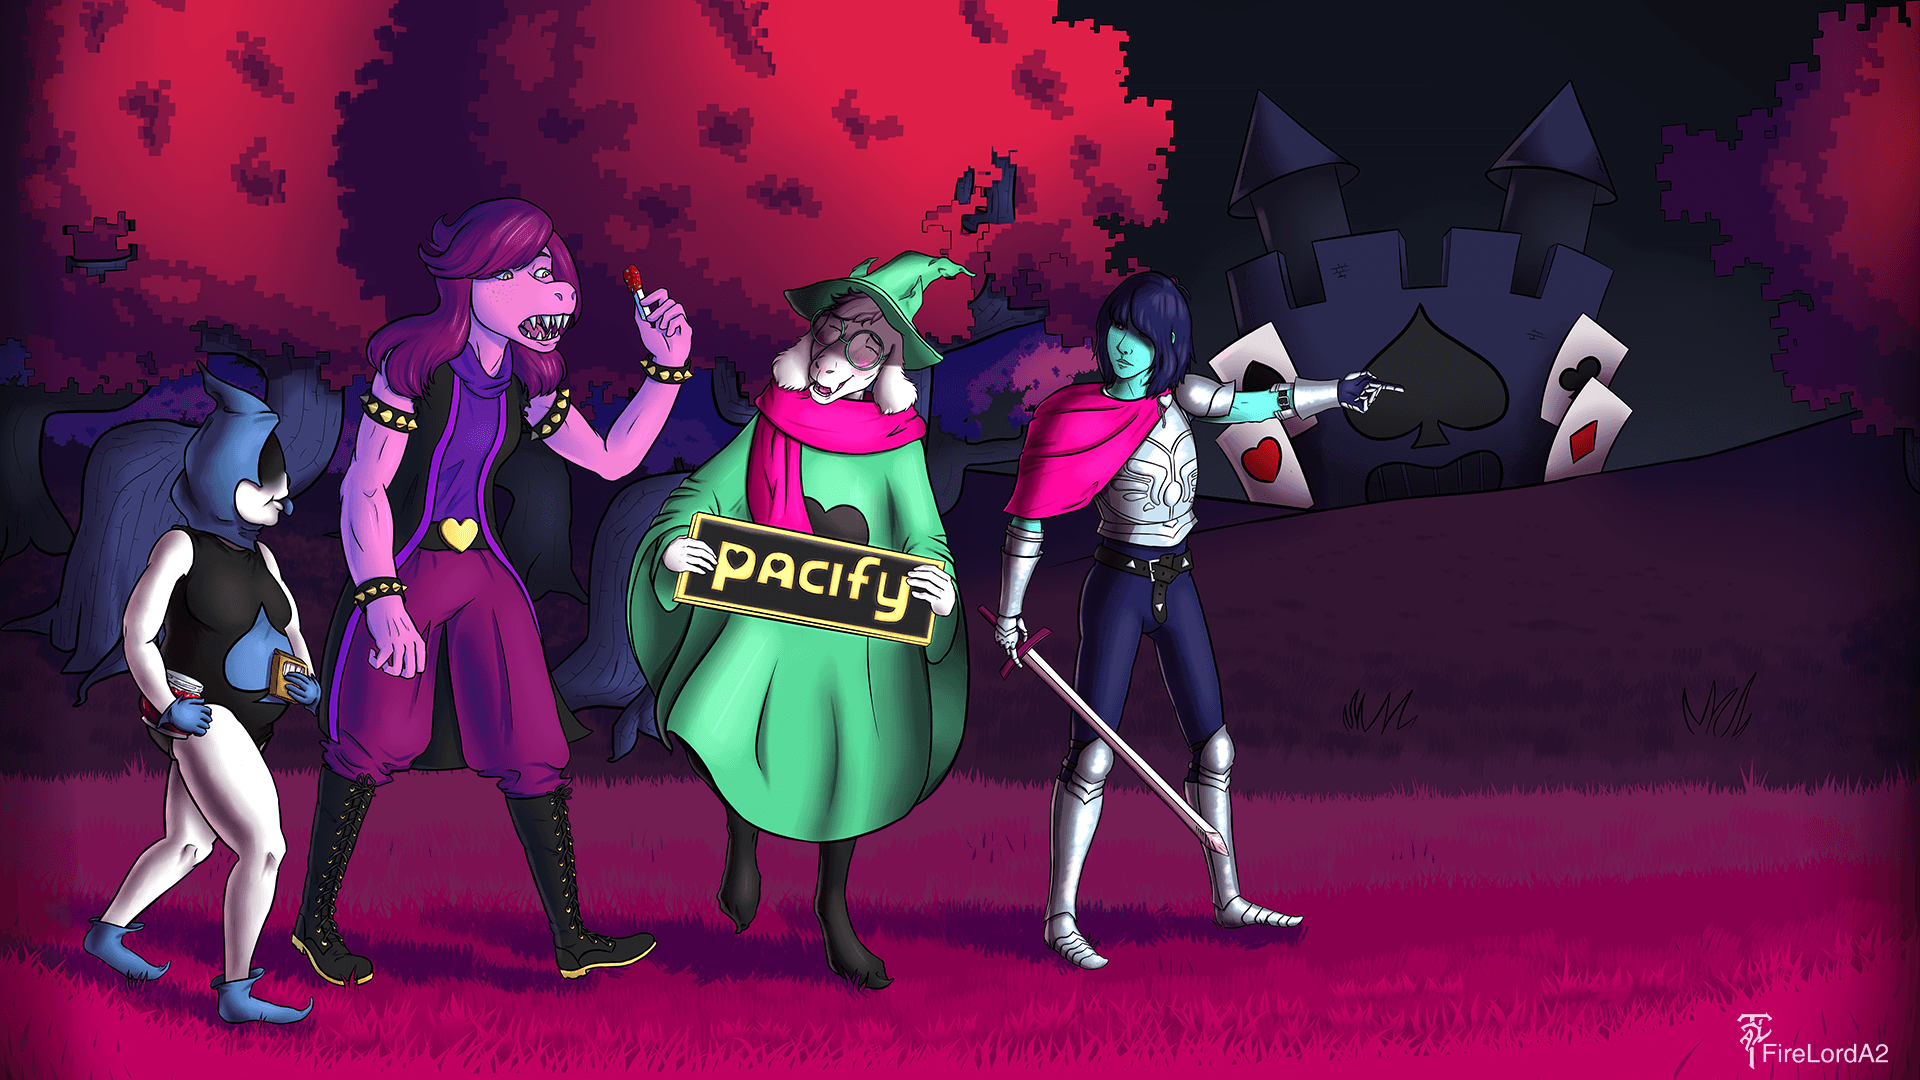 Done with my Deltarune Poster artwork this isn't the original, but